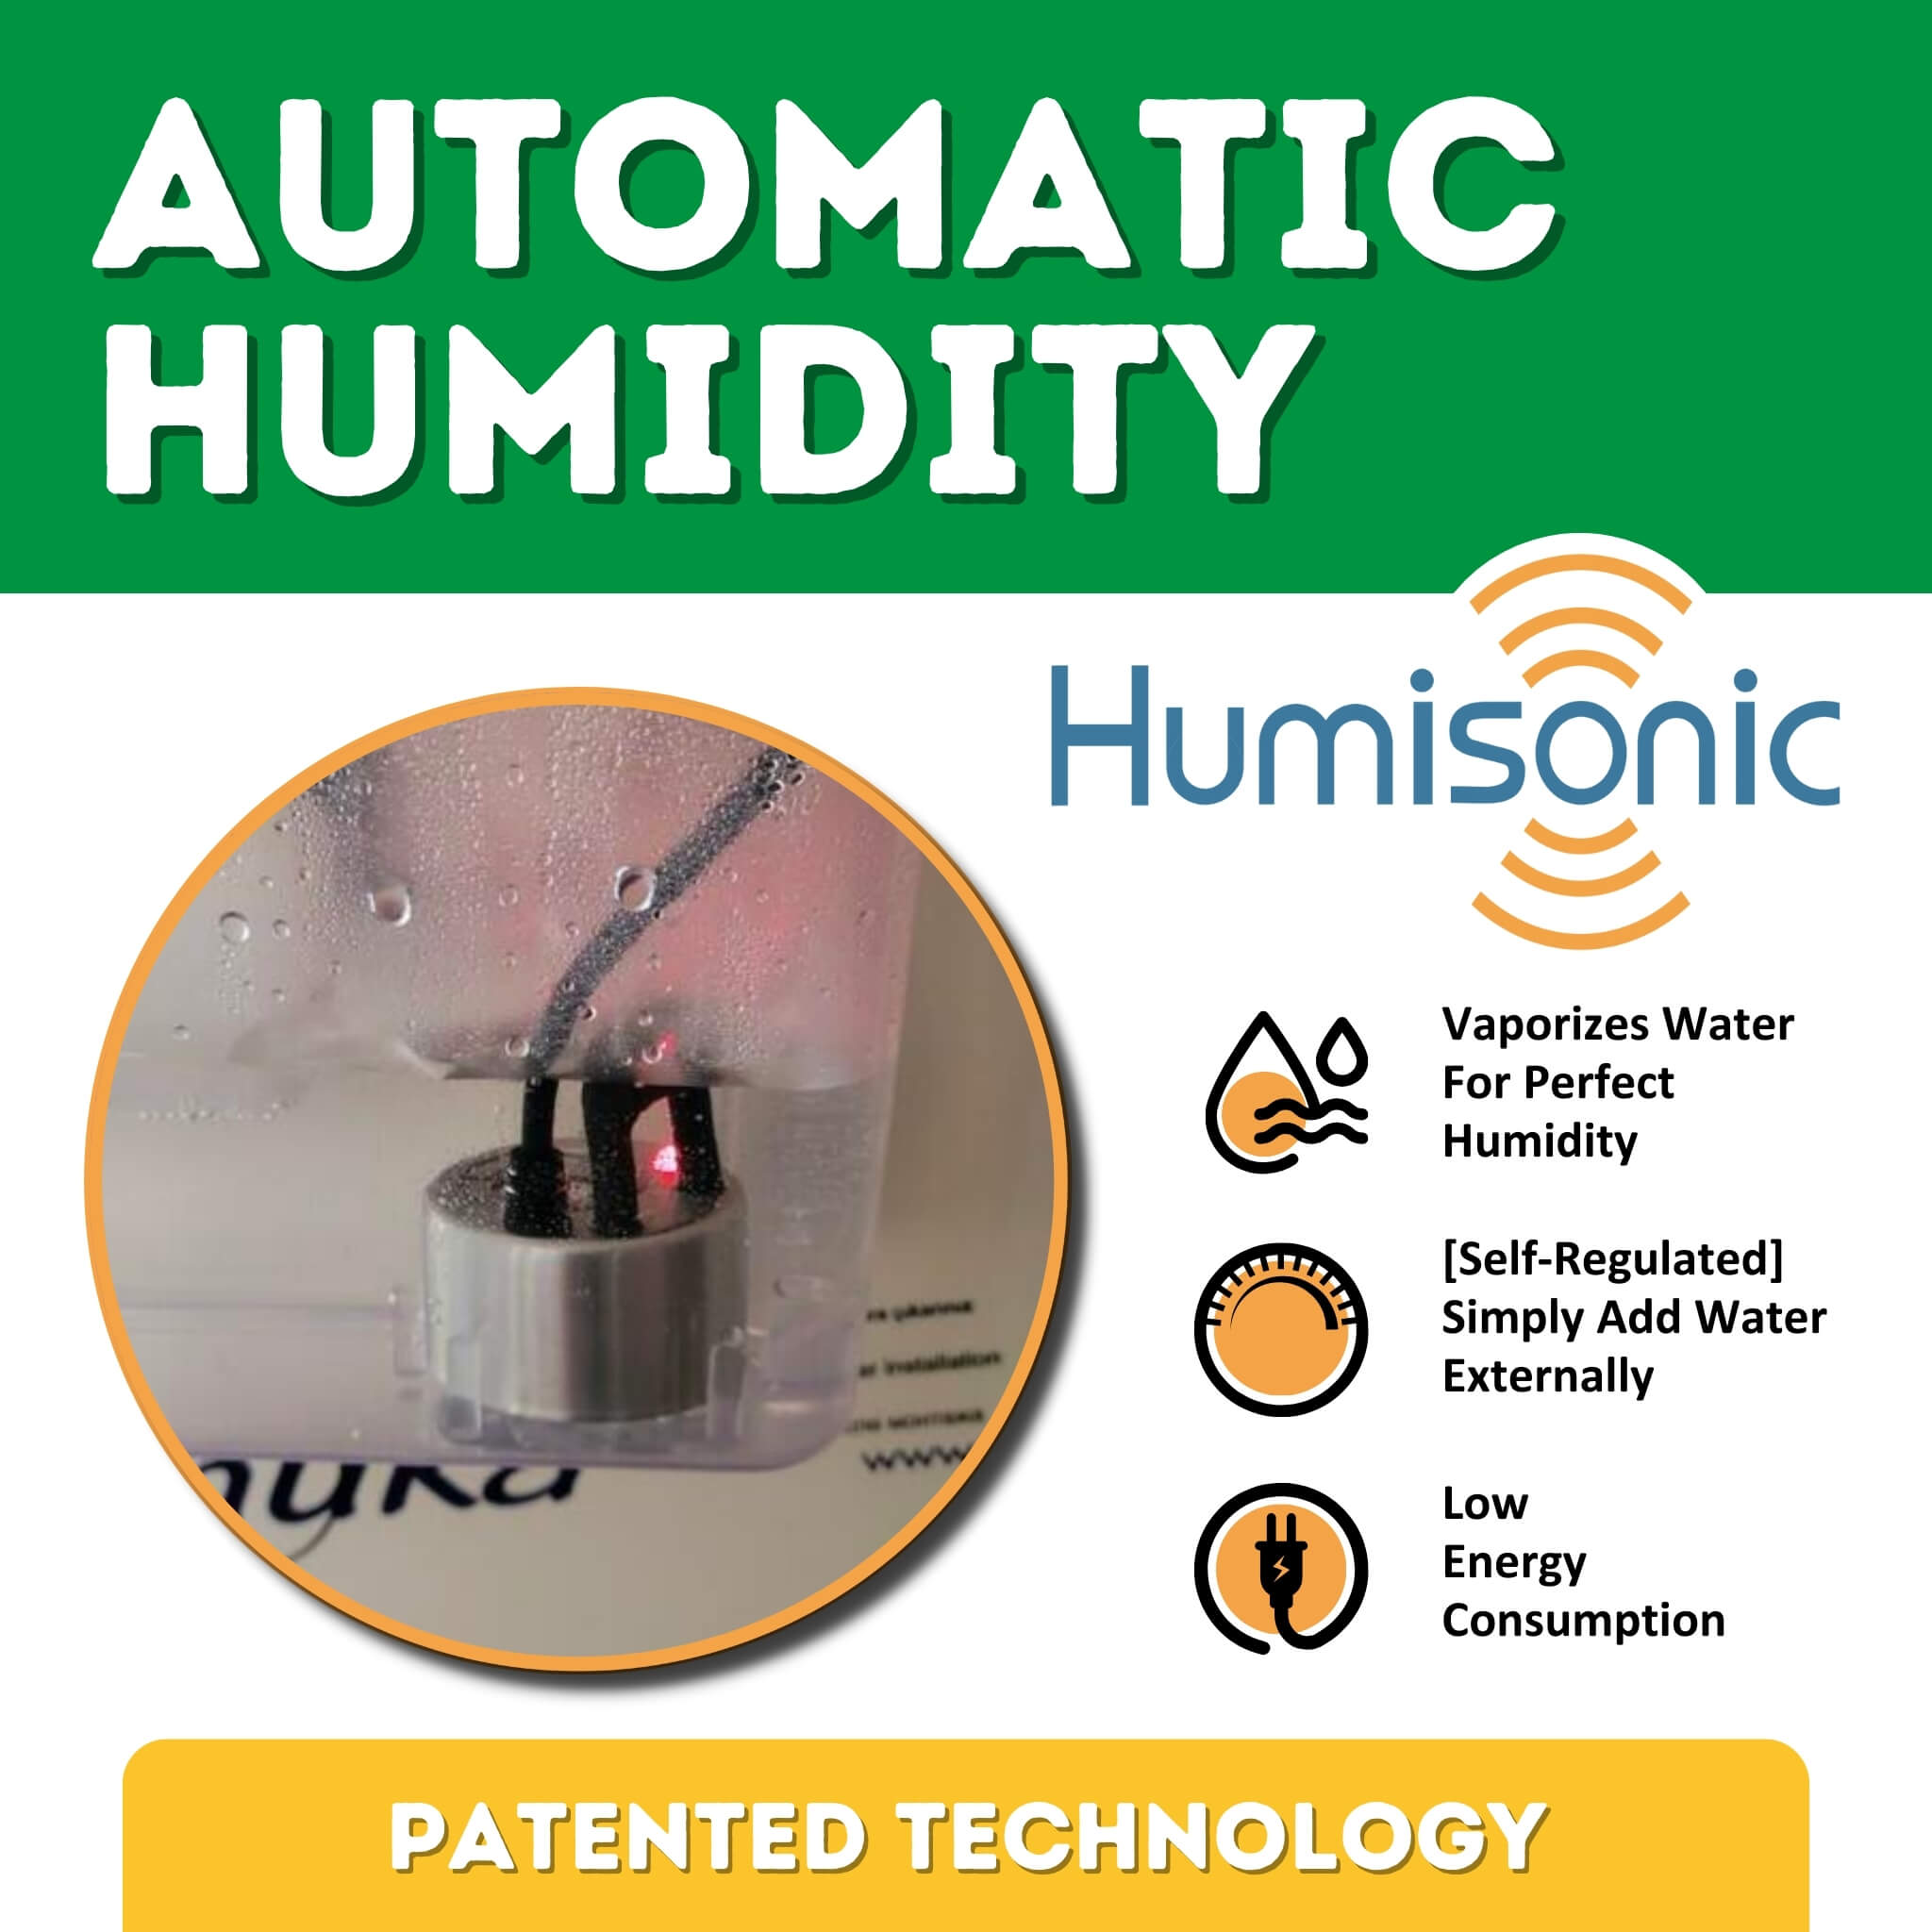 Hatching Time Cimuka. Infographic Showcasing Humisonic technology HB500C egg incubator, a patented solution for precise humidity control in poultry egg incubation.